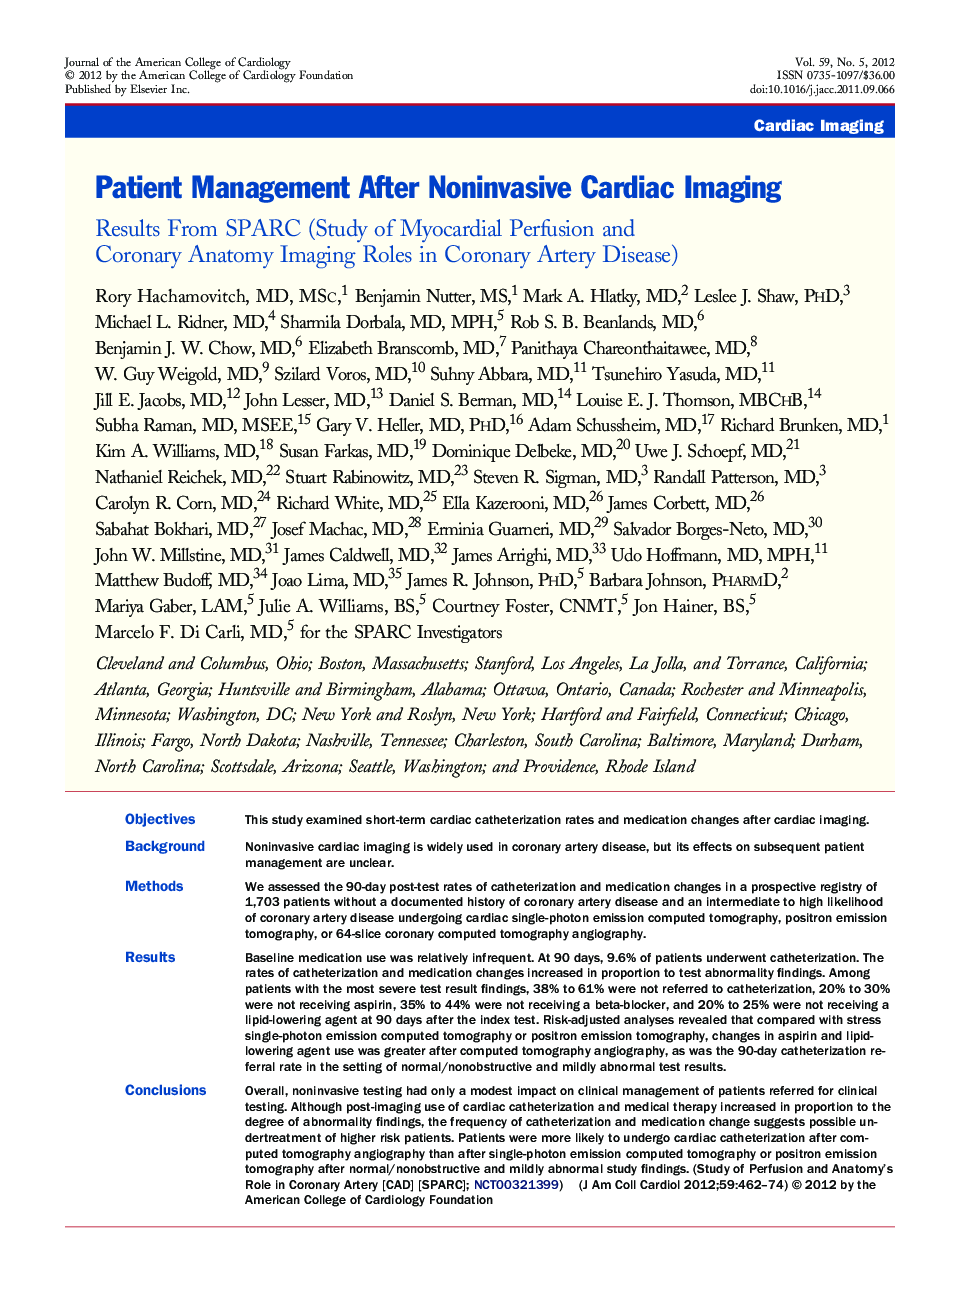 Patient Management After Noninvasive Cardiac Imaging : Results From SPARC (Study of Myocardial Perfusion and Coronary Anatomy Imaging Roles in Coronary Artery Disease)